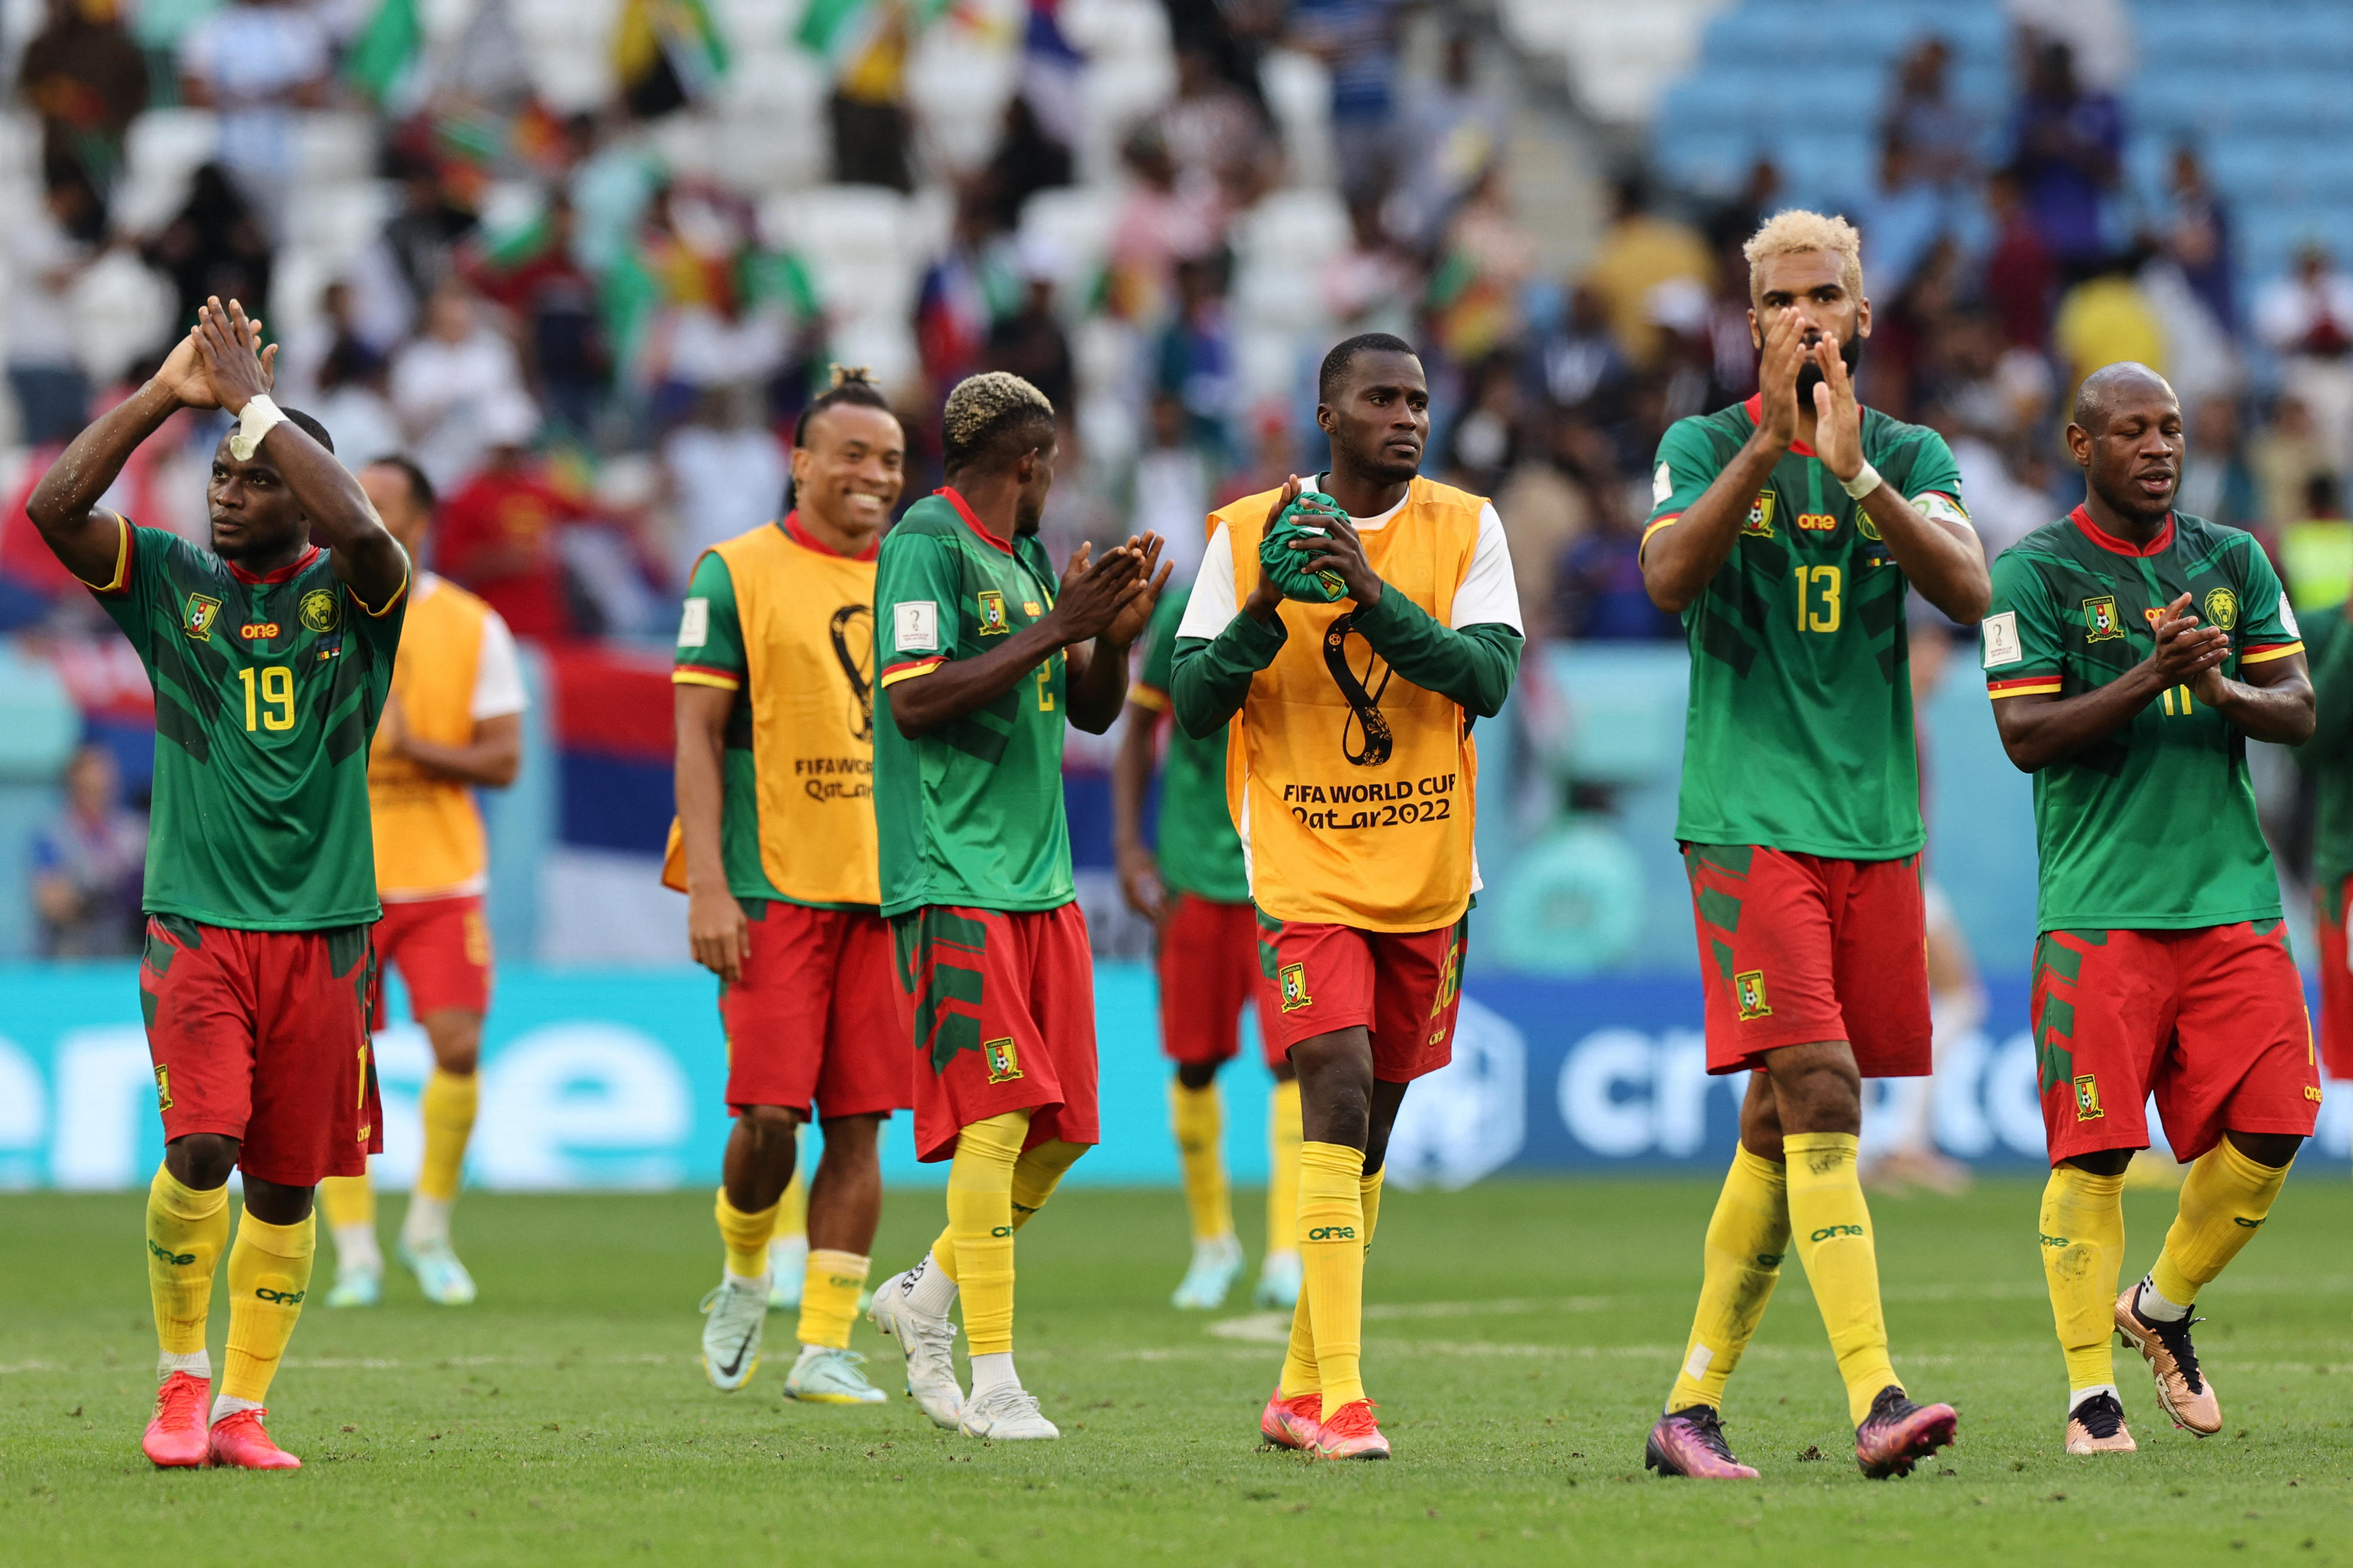 CAMEROONS DRAW A THRILLER IN THE FIFA WORLD CUP WITH SERBIA